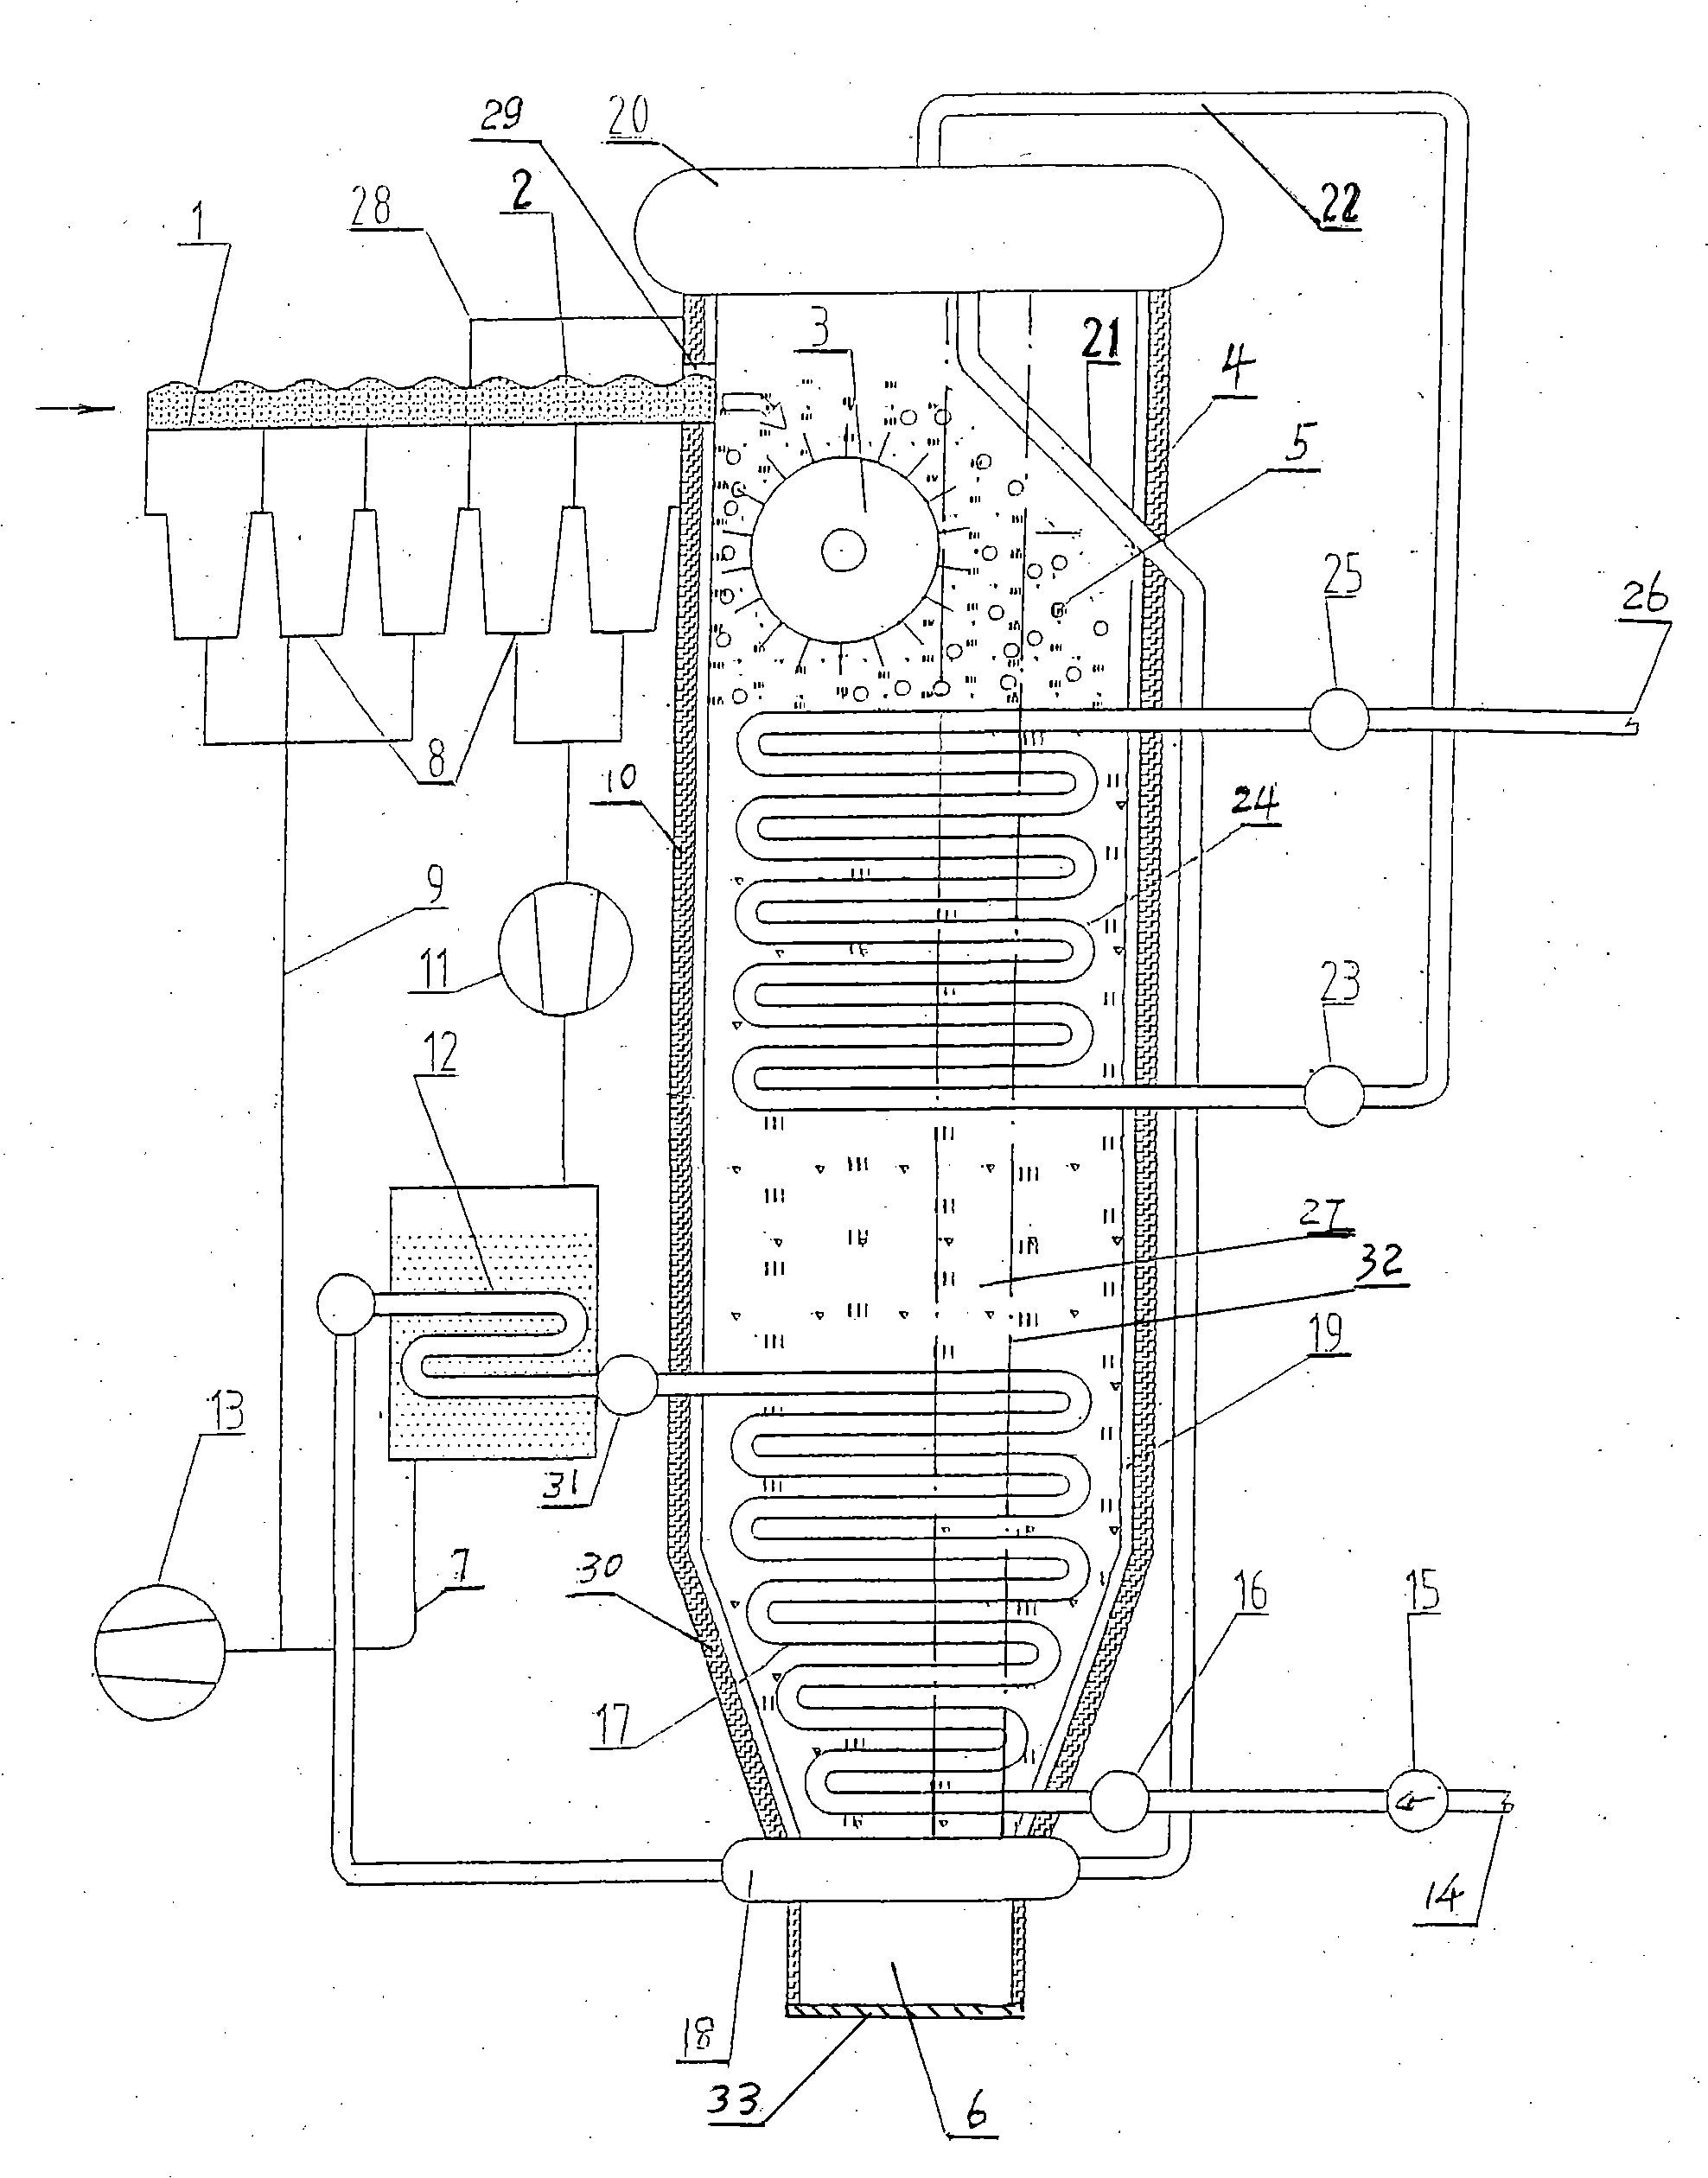 System and method for generating steam by directly utilizing sensible heat of high-temperature sintering ore material